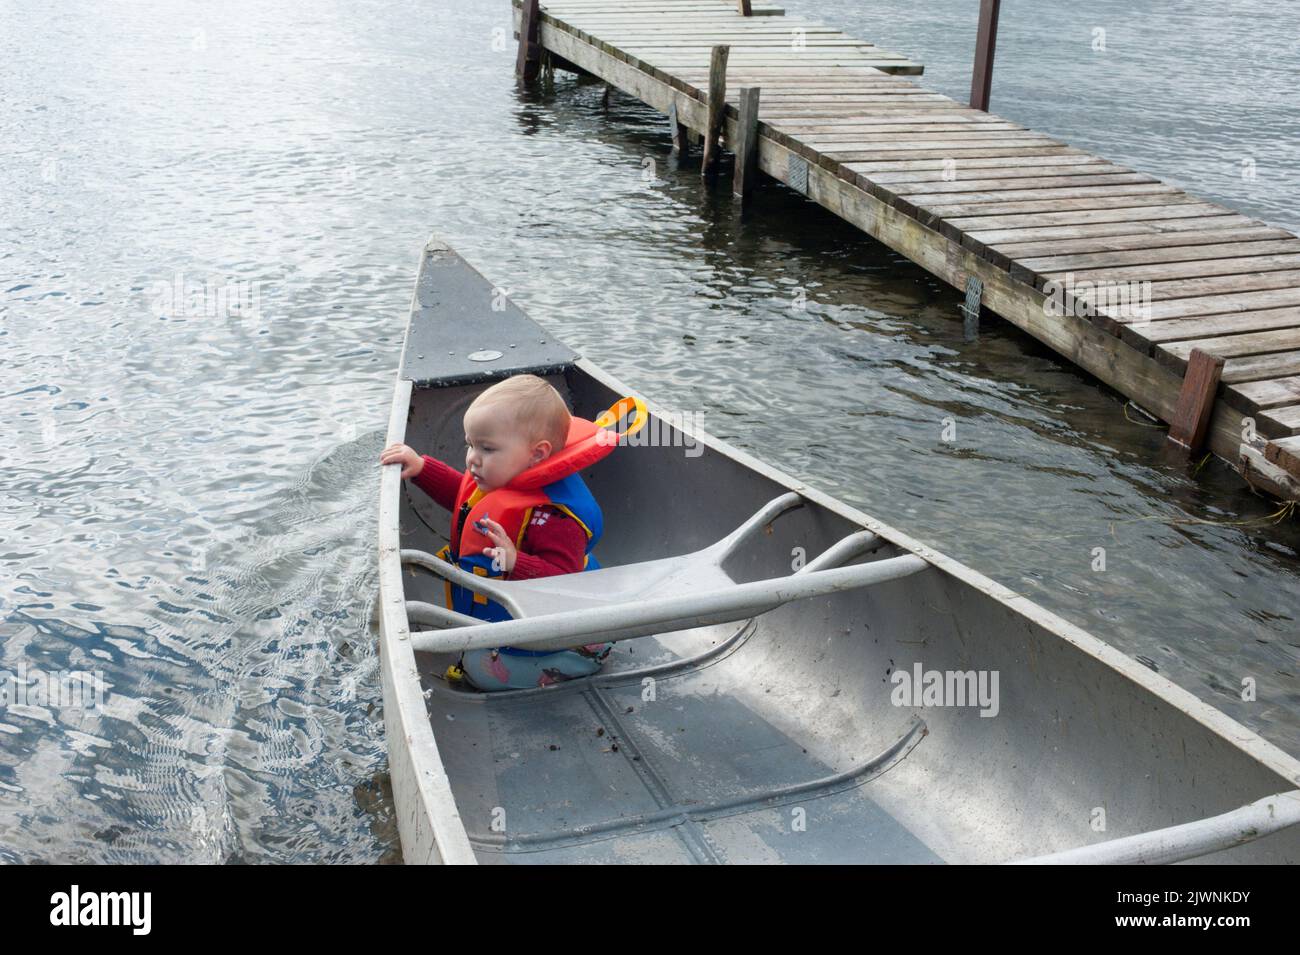 A one-year-old toddler sits in the bow of a grumman canoe by an old wooden dock on the Saint Lawernce River. Stock Photo